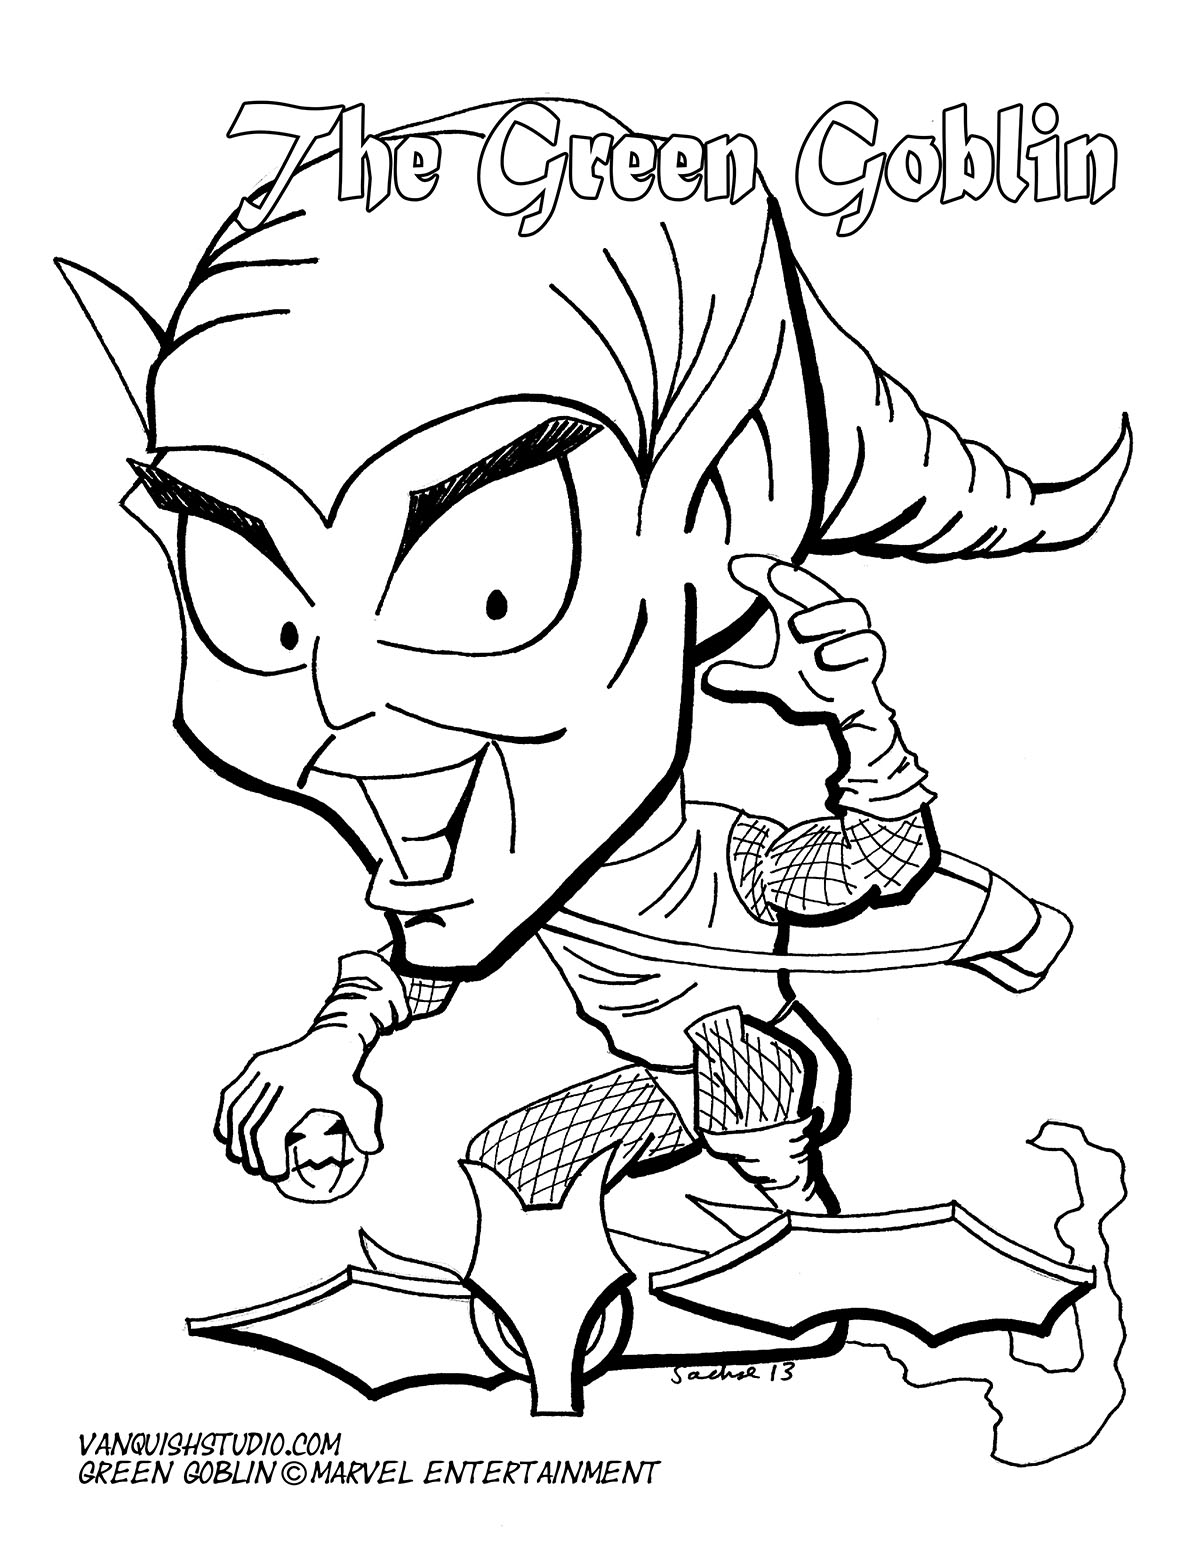 New coloring page â the green goblin stay safe and away from crowds dont spread color instead vanquish studio